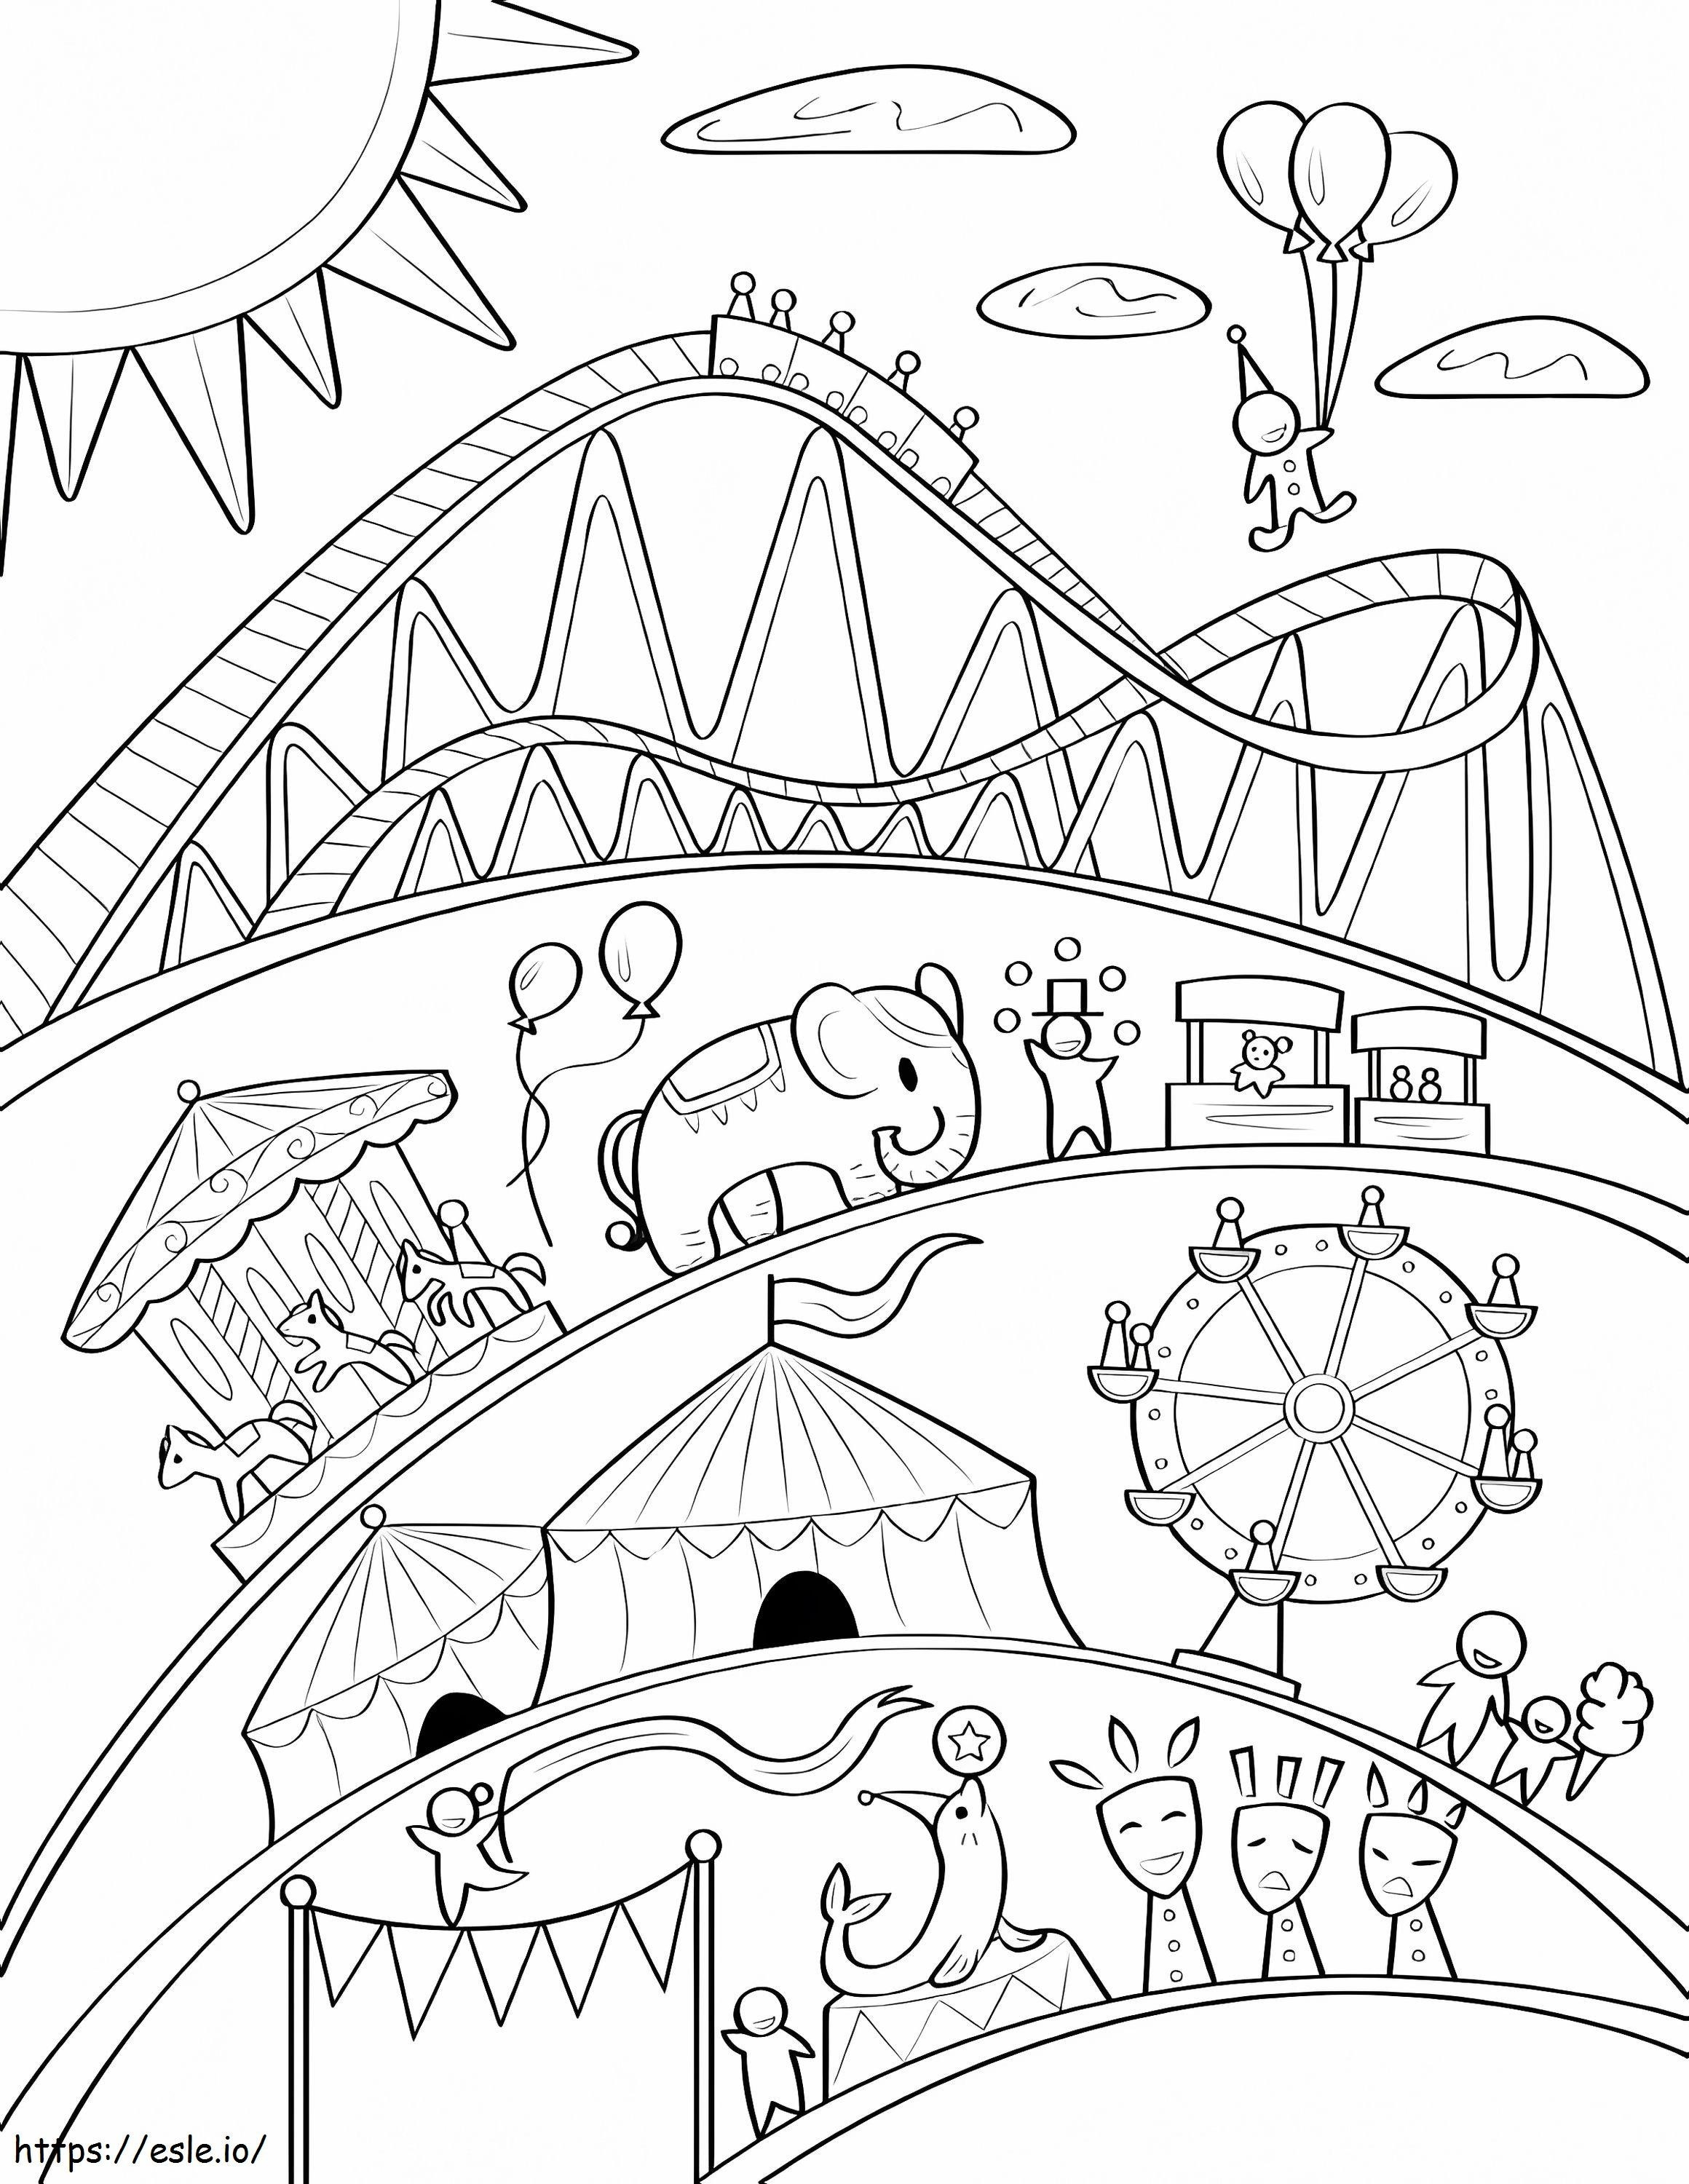 Carnival 20 coloring page